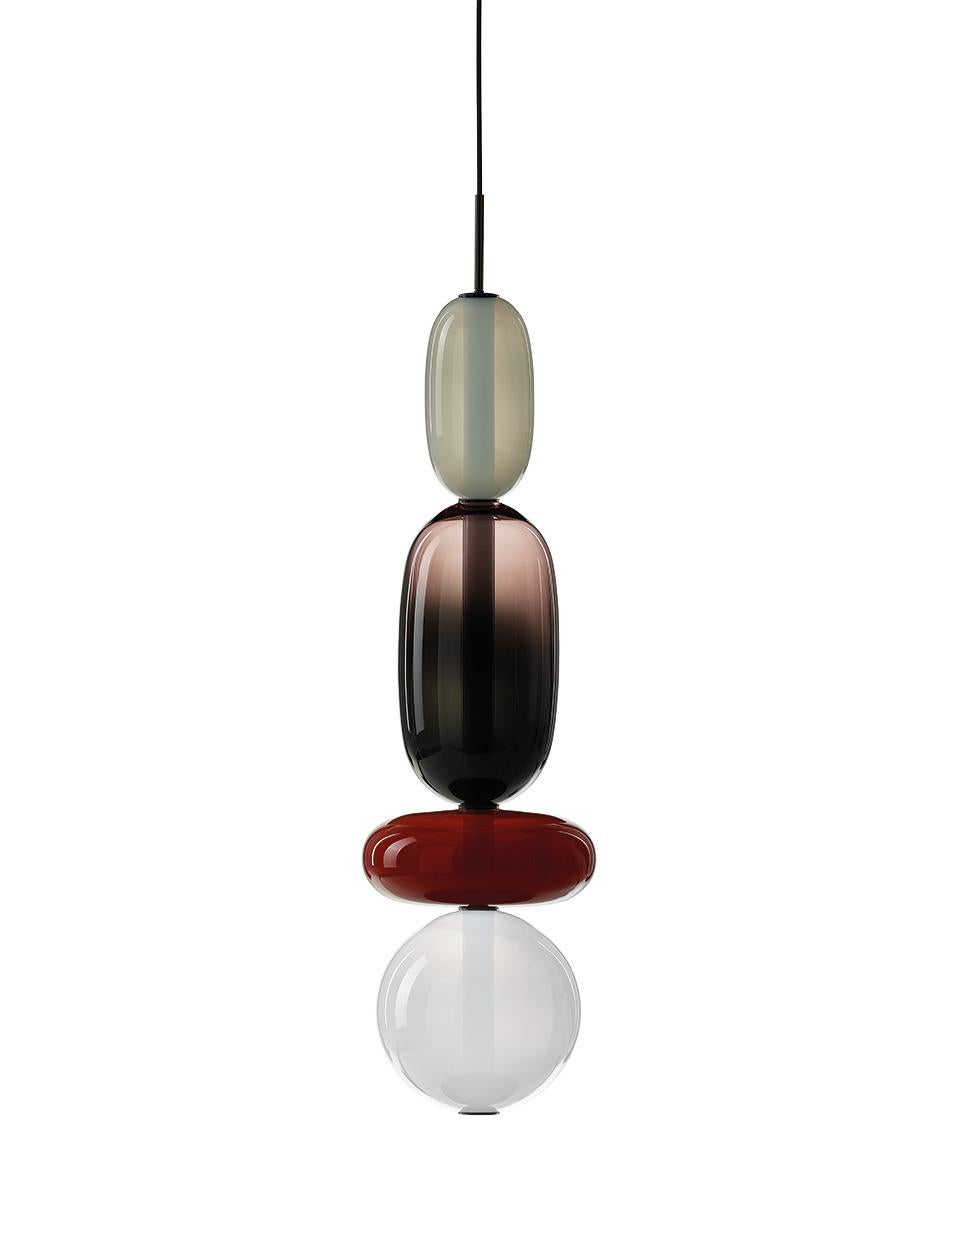 Contemporary blown crystal glass pendant - Pebbles by Boris Klimek for Bomma

Pebbles are reminders of exceptional moments or favorite places. Their diverse shapes and colors inspired BOMMA’s playful collection that invites you to express your